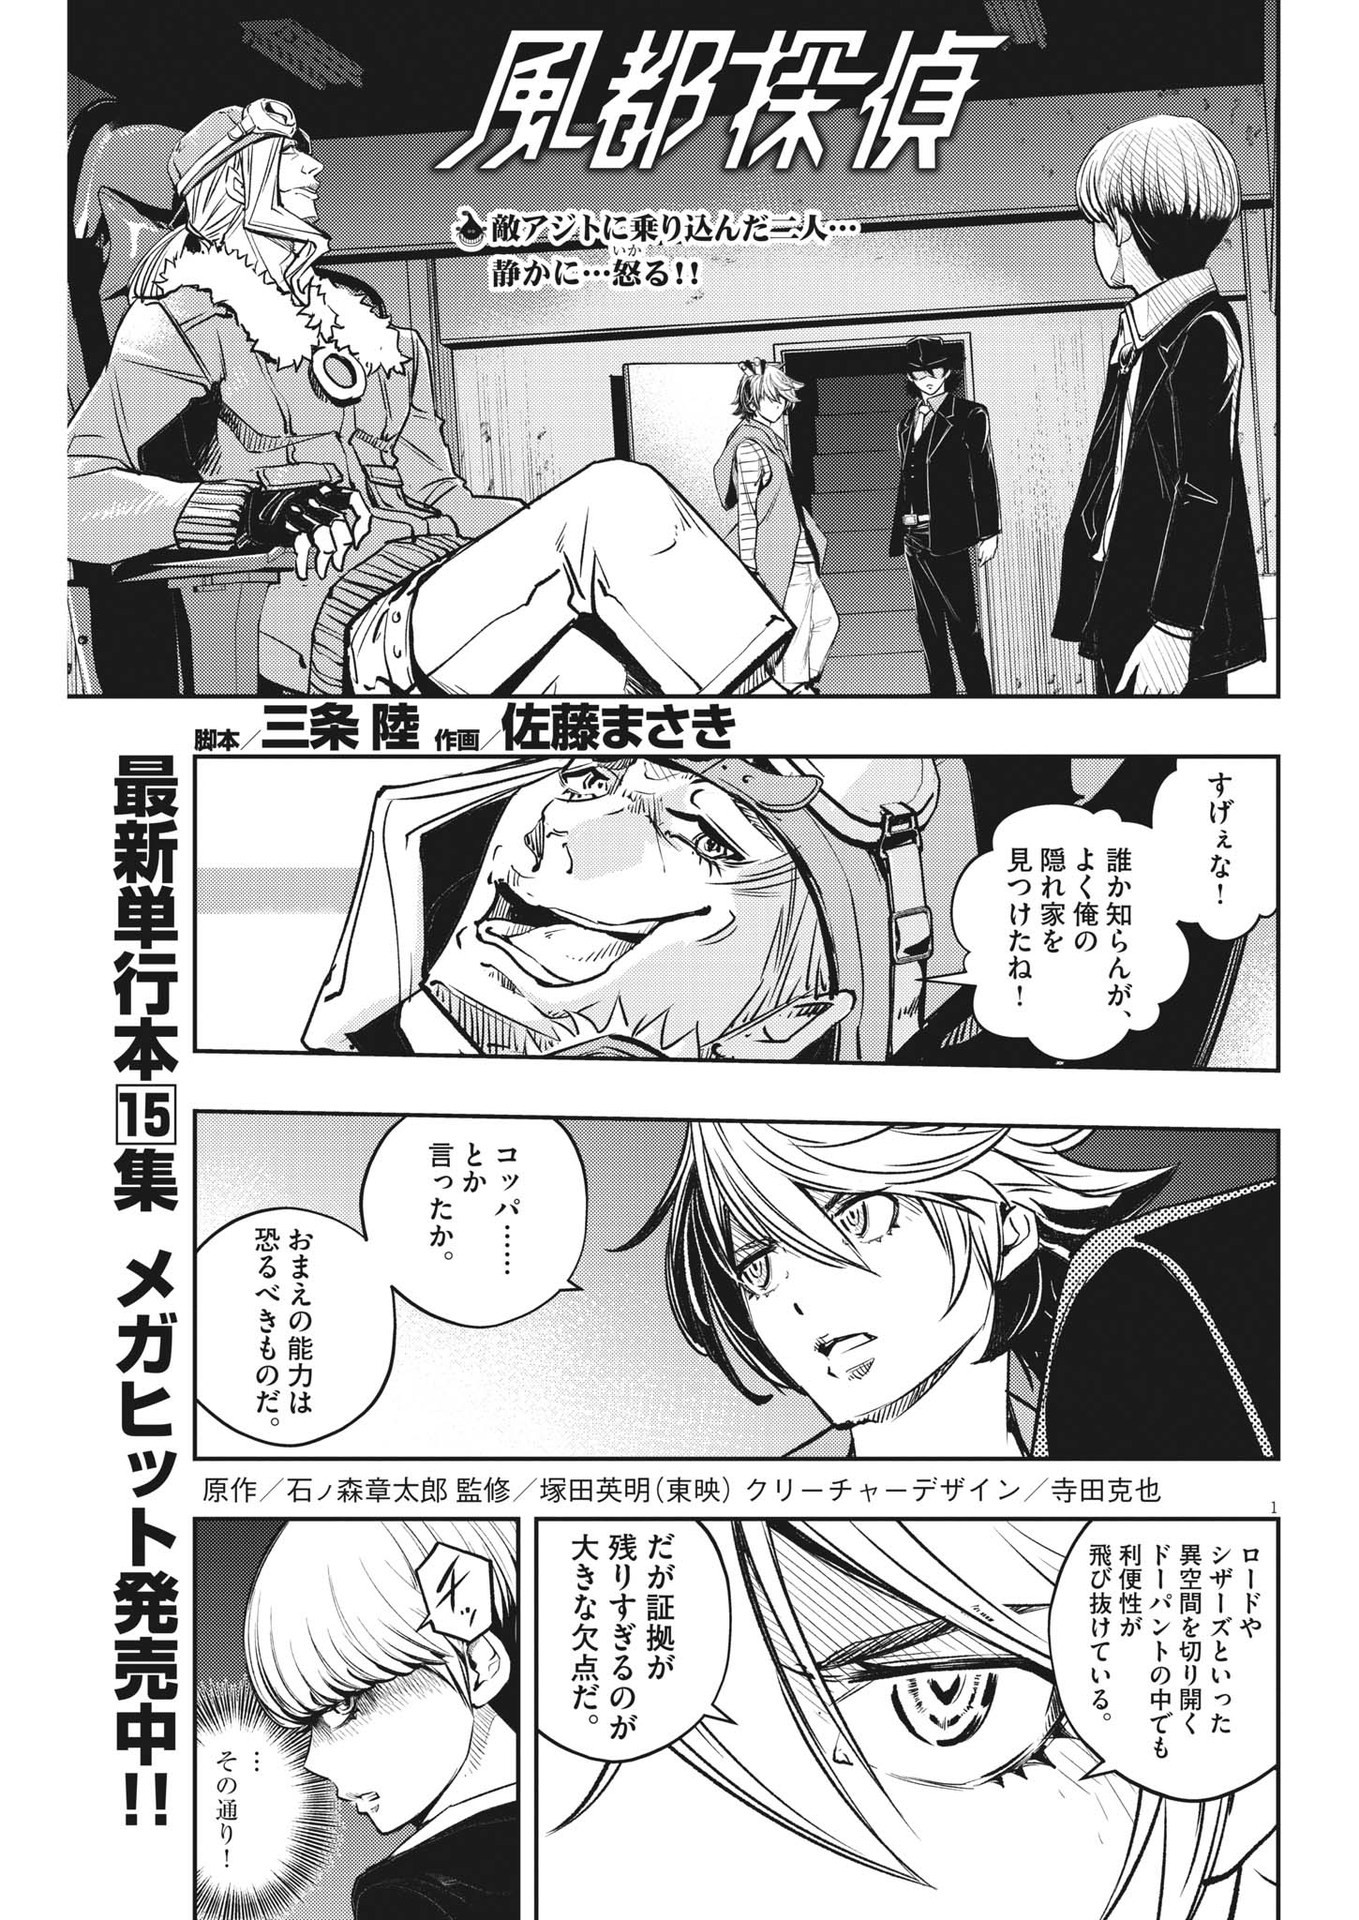 Kamen Rider W: Fuuto Tantei - Chapter 140 - Page 1